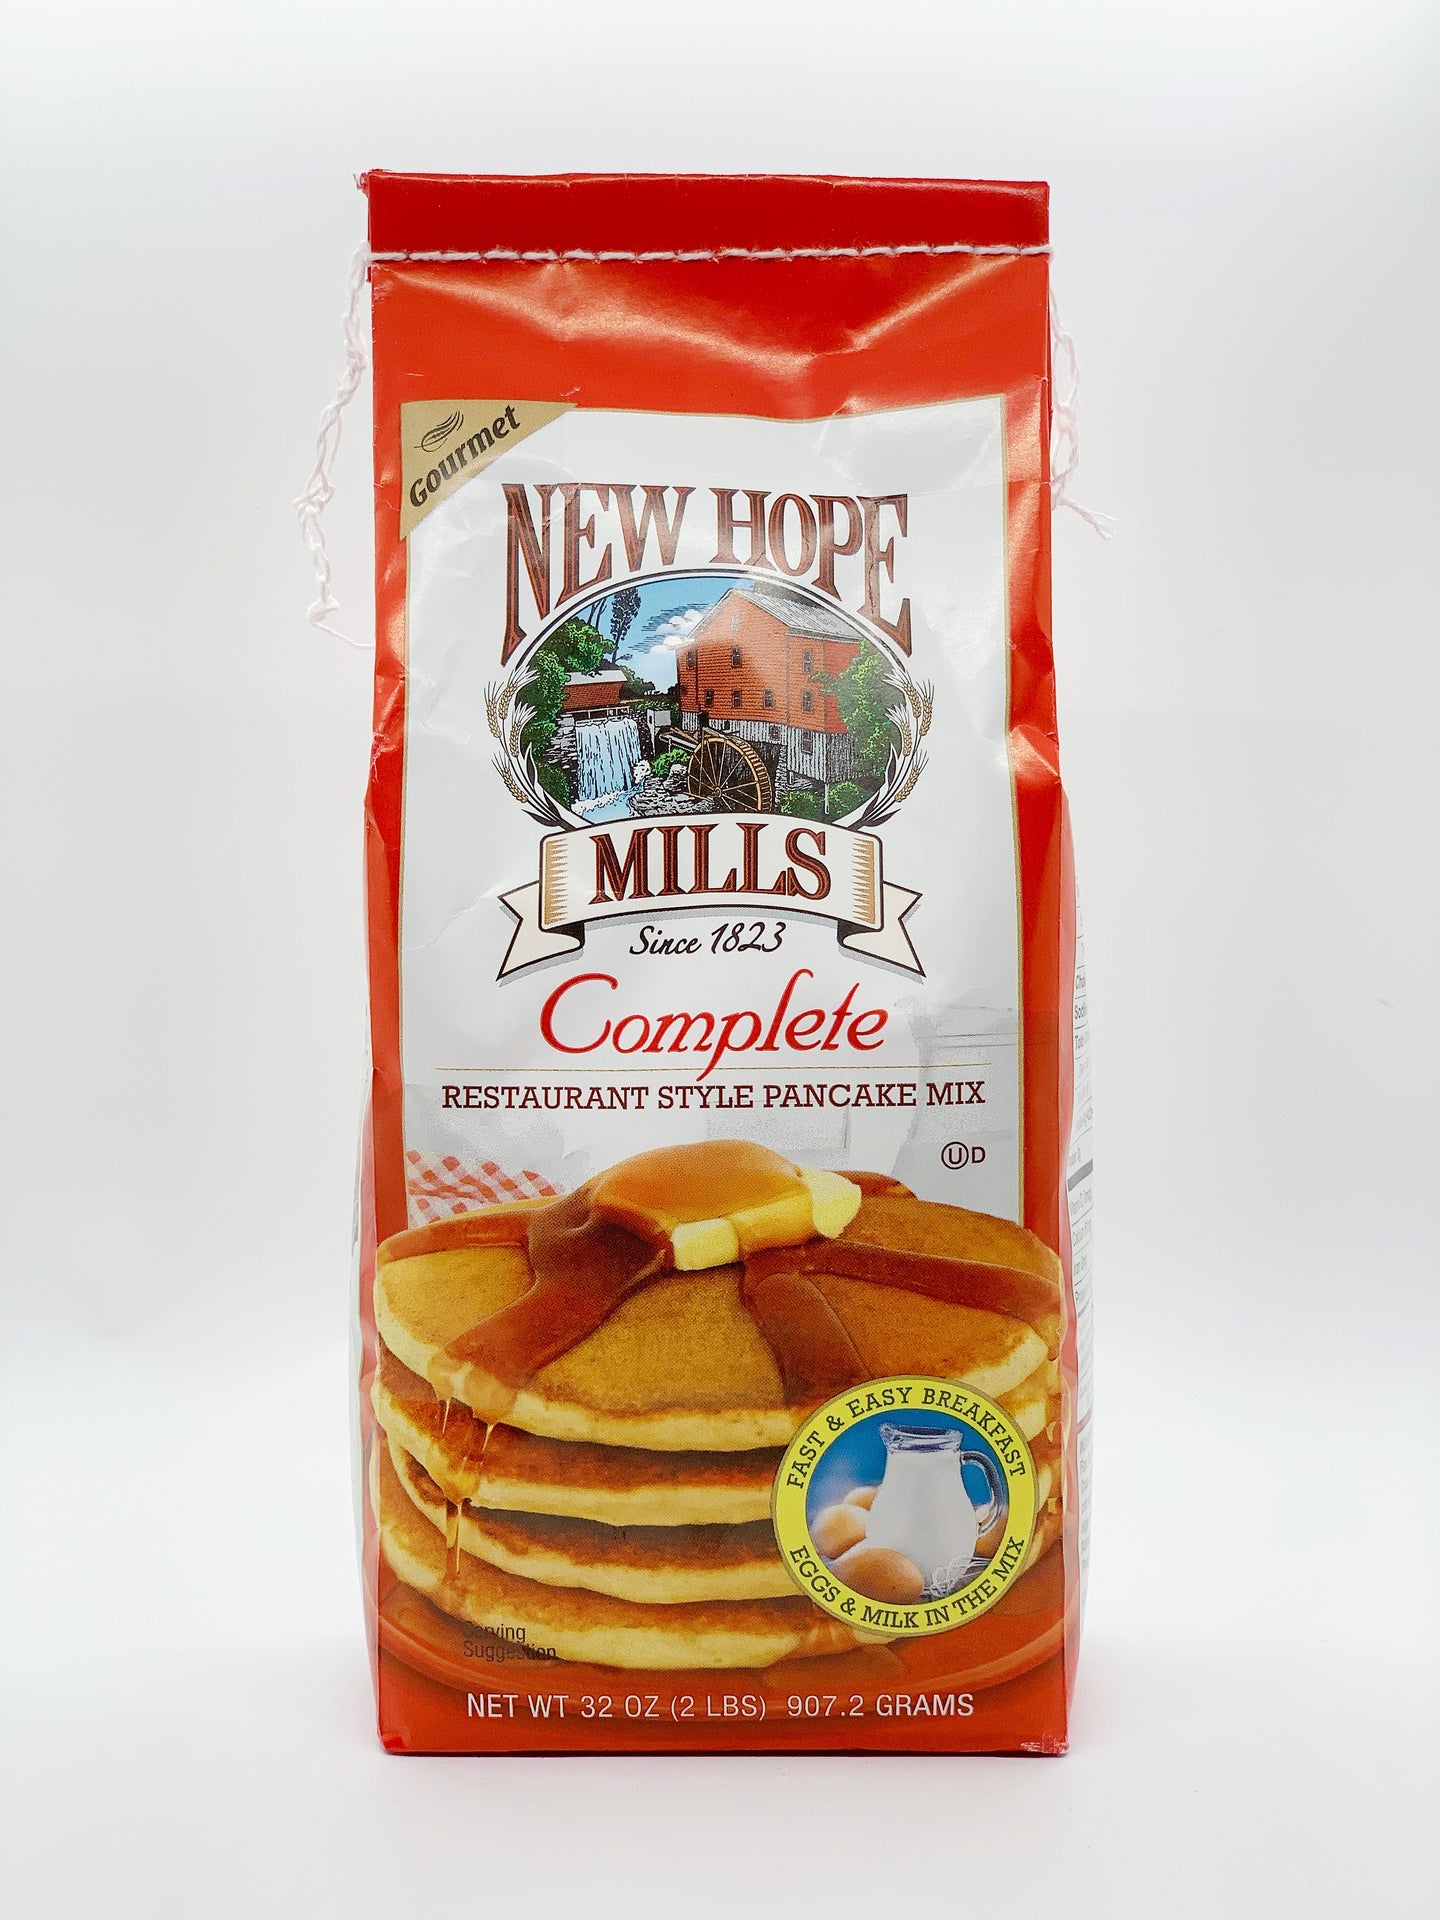 New Hope Complete Pancake Mix